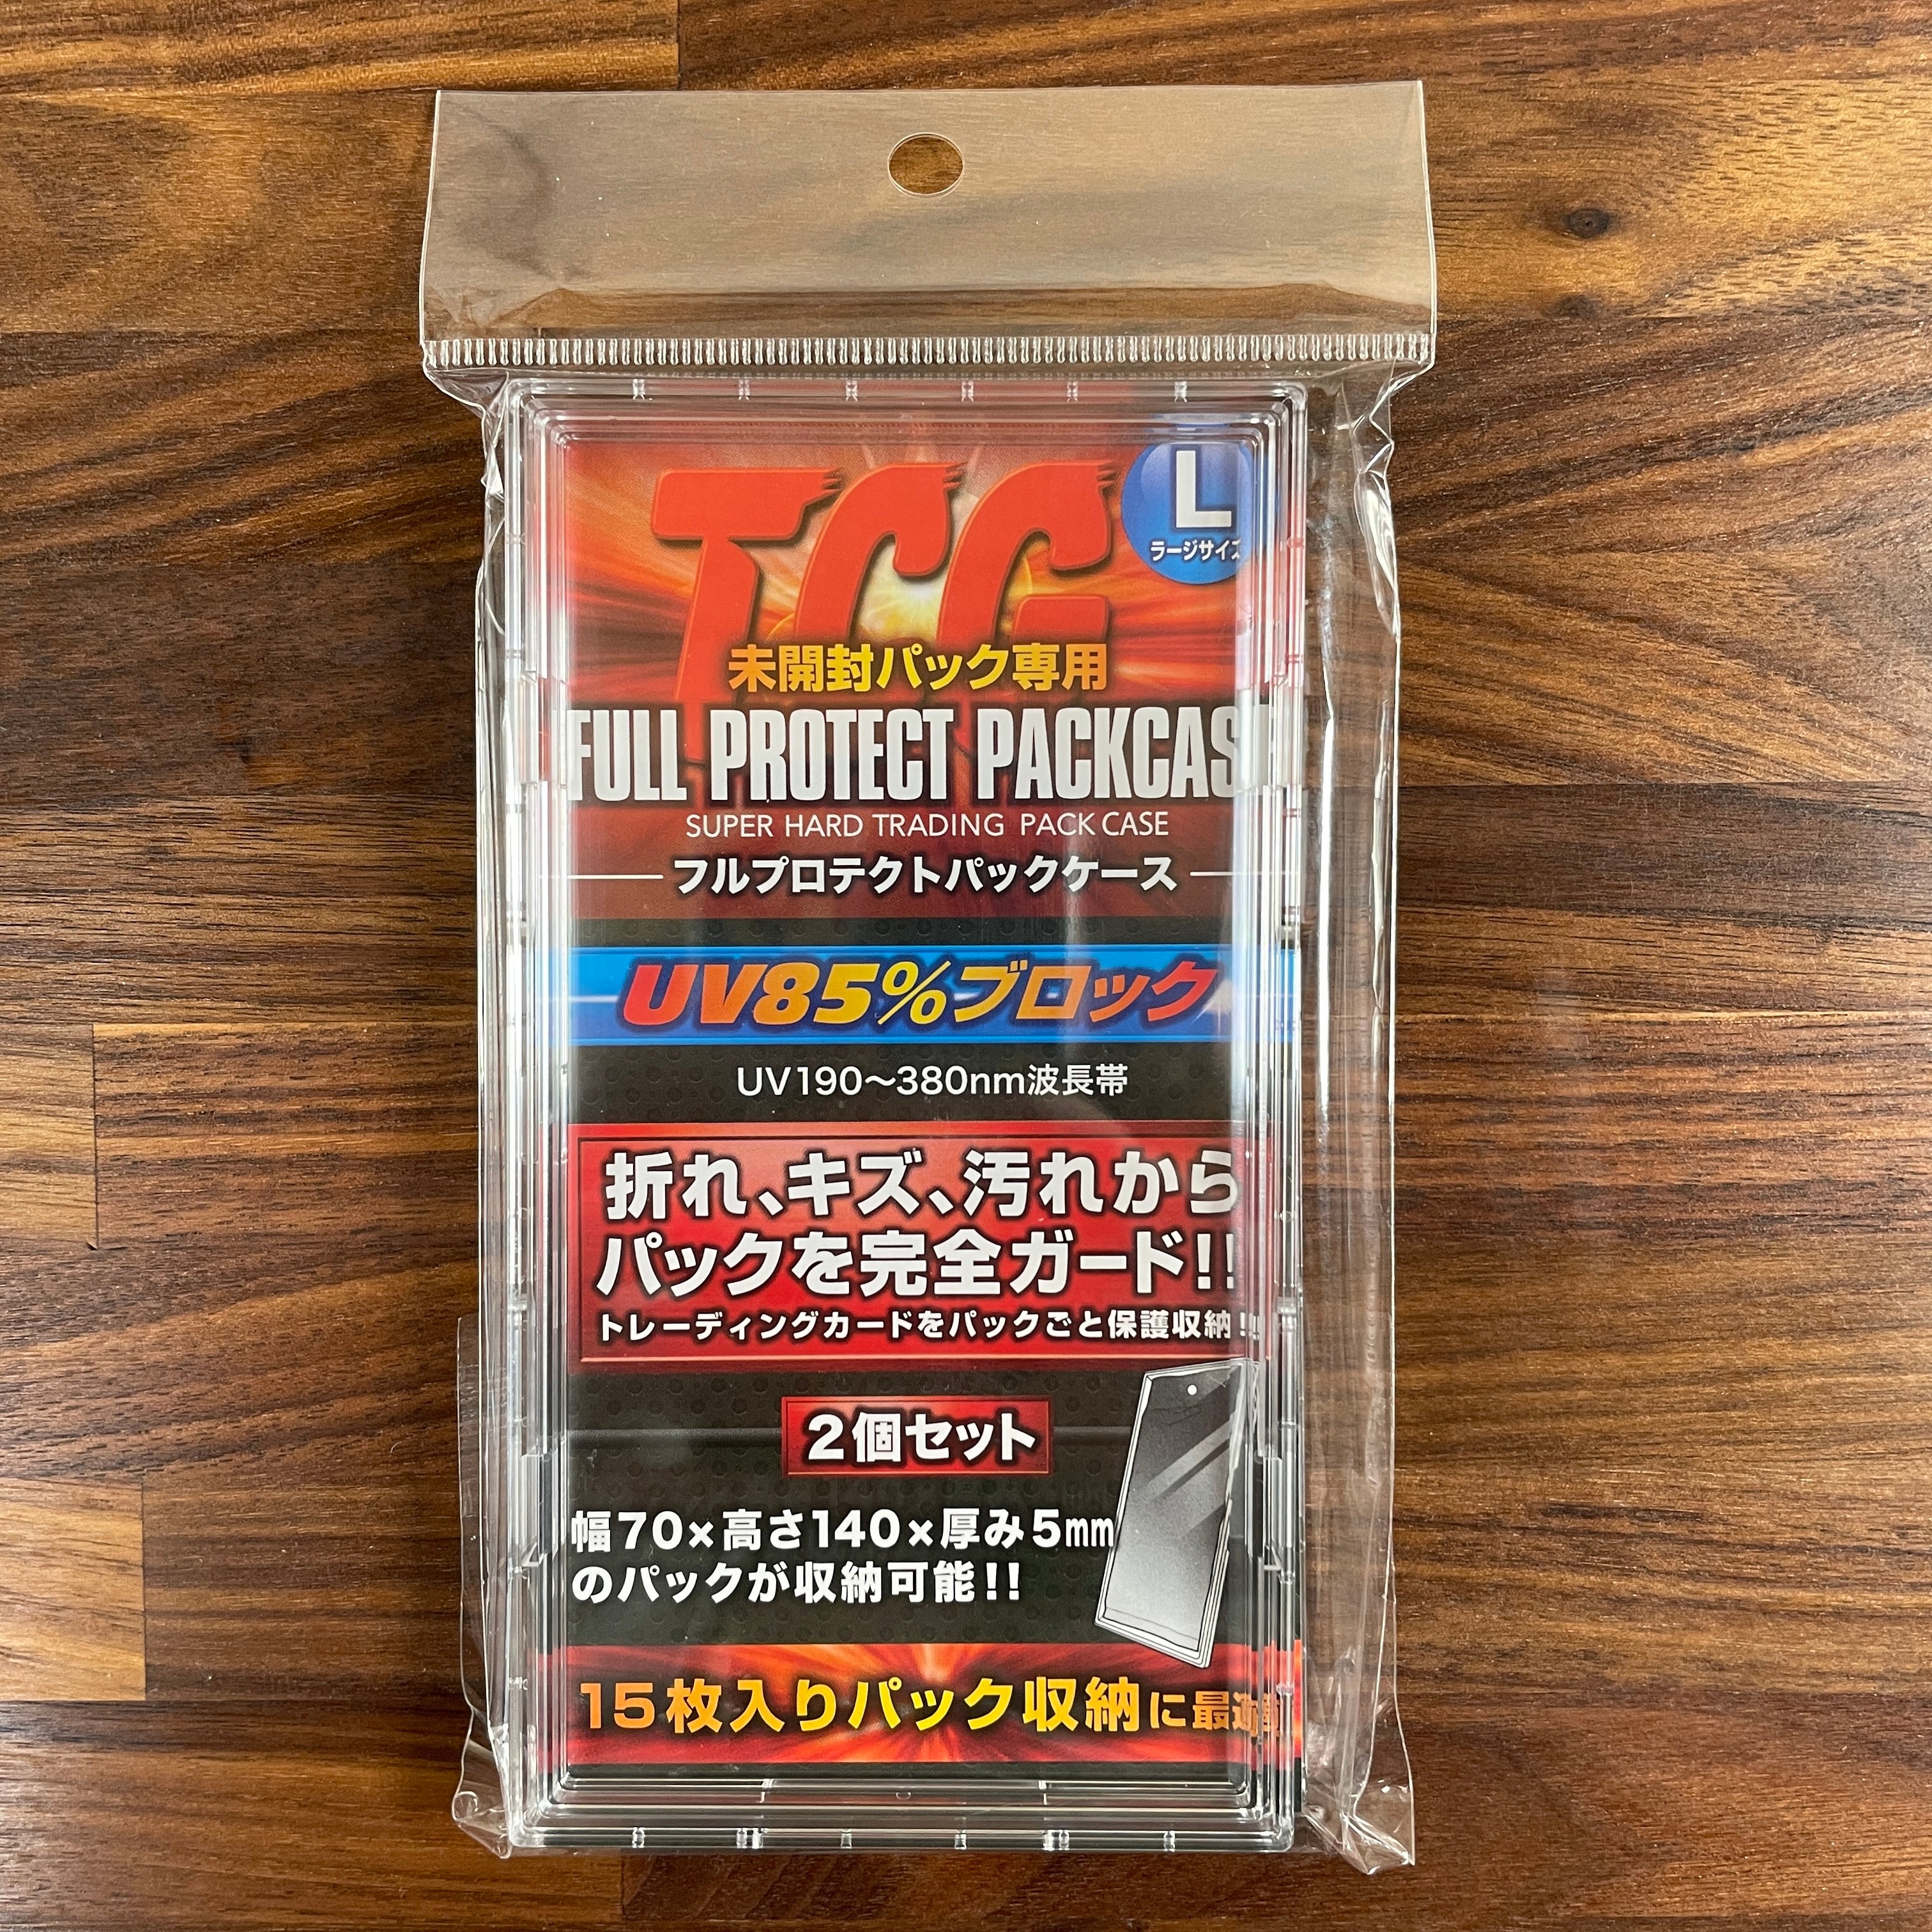 FULL PROTECT PACKCAGE SUPER HARD TRADING PACK CASE Large size (set of